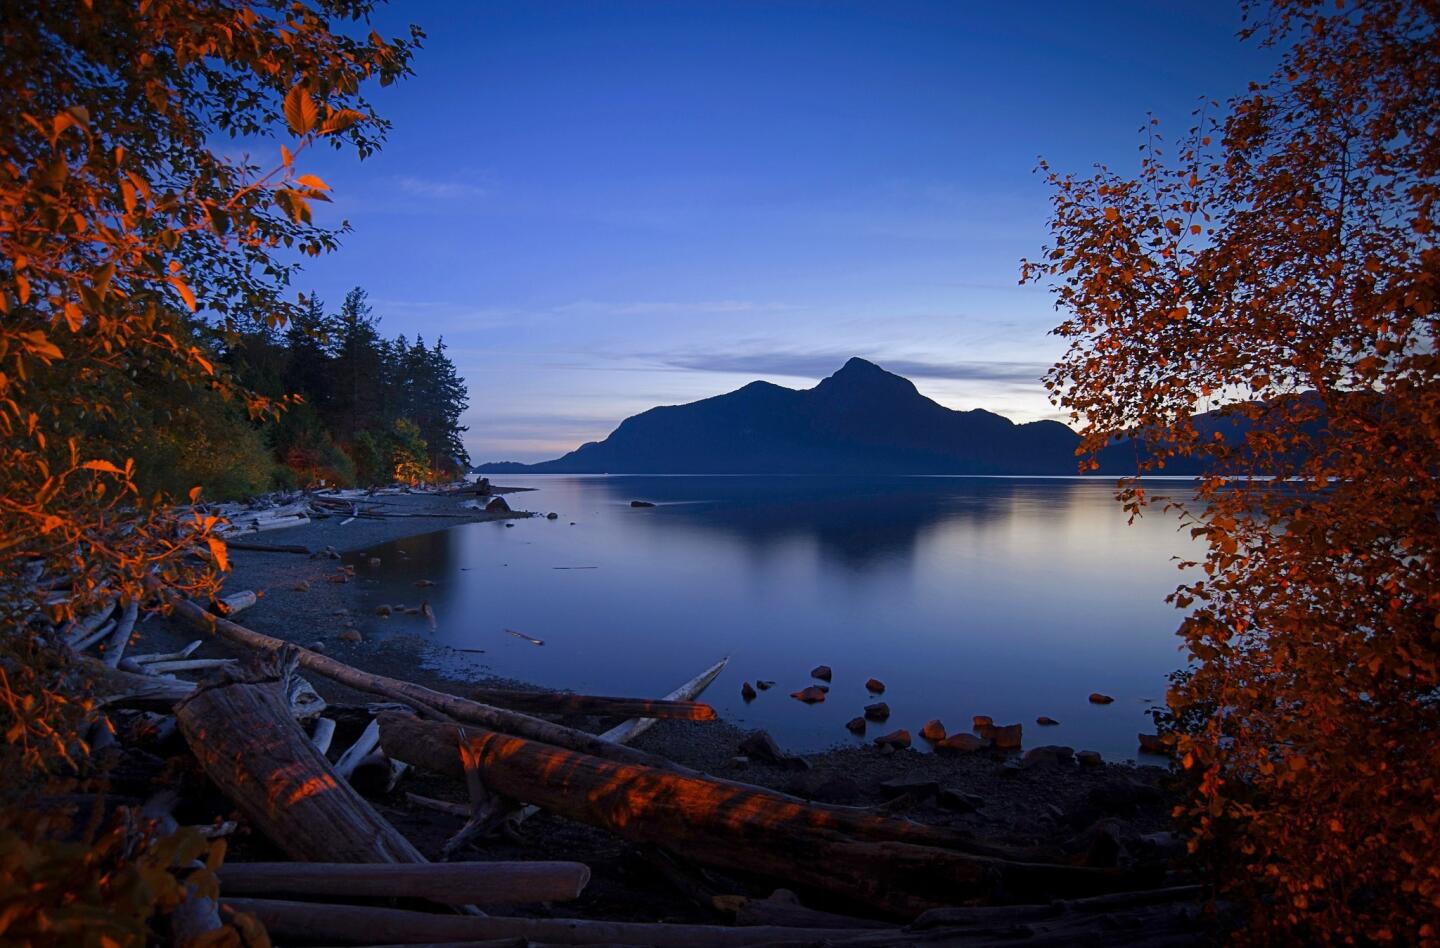 Porteau Cove is a popular destination for scuba divers, who can explore a shipwreck and artificial reefs hidden within the Howe Sound.